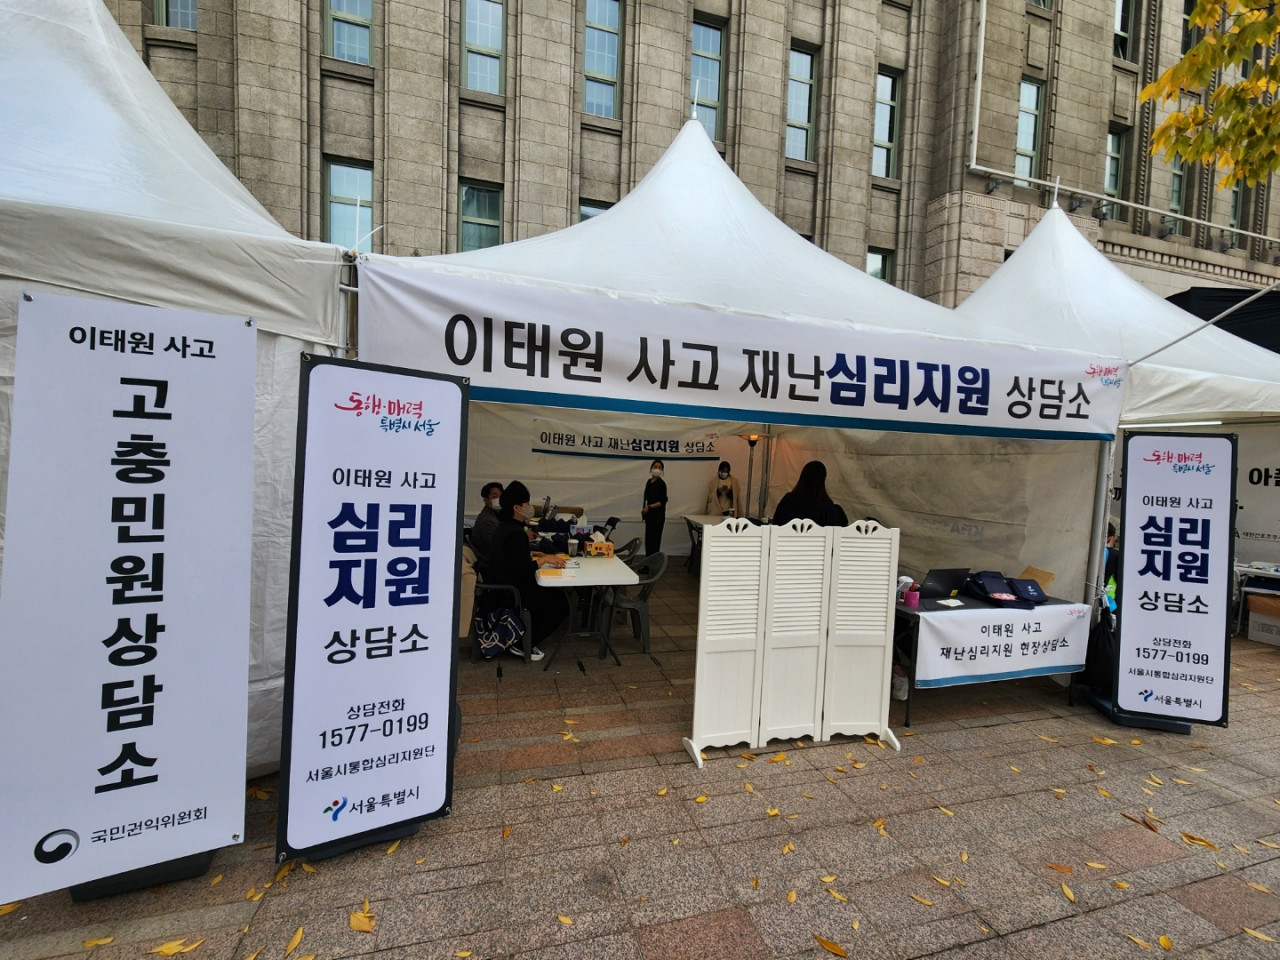 Professional counselors provide mental health support Tuesday to help people cope in the wake of the deadly crowd crush in Itaewon Saturday night. (Choi Jae-hee/The Korea Herald)